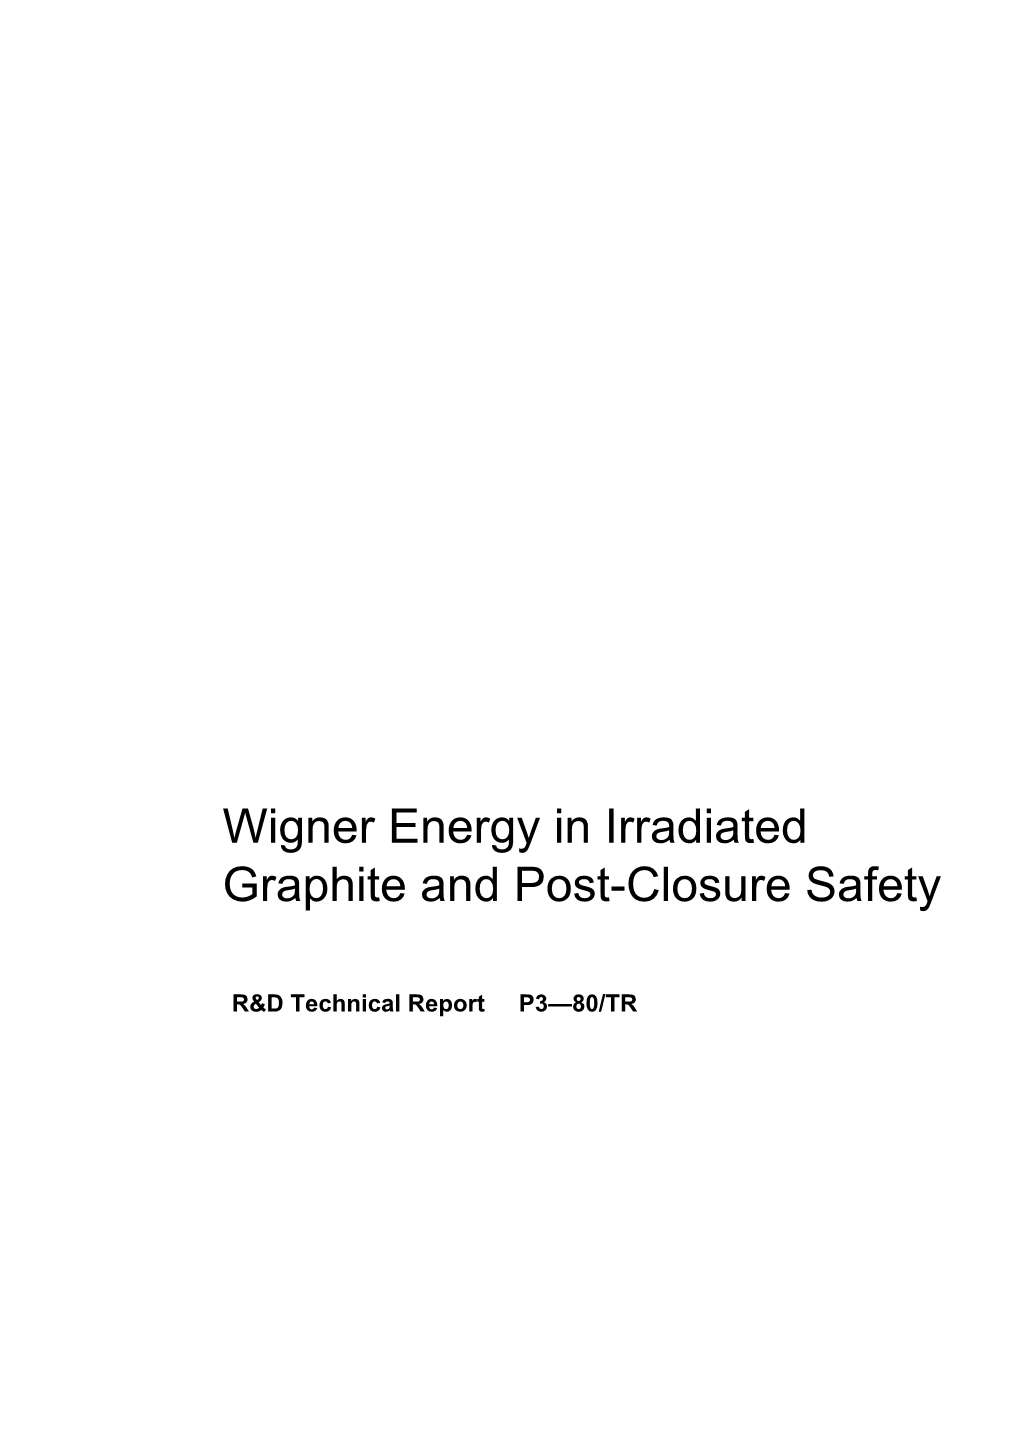 Wigner Energy in Irradiated Graphite and Post-Closure Safety